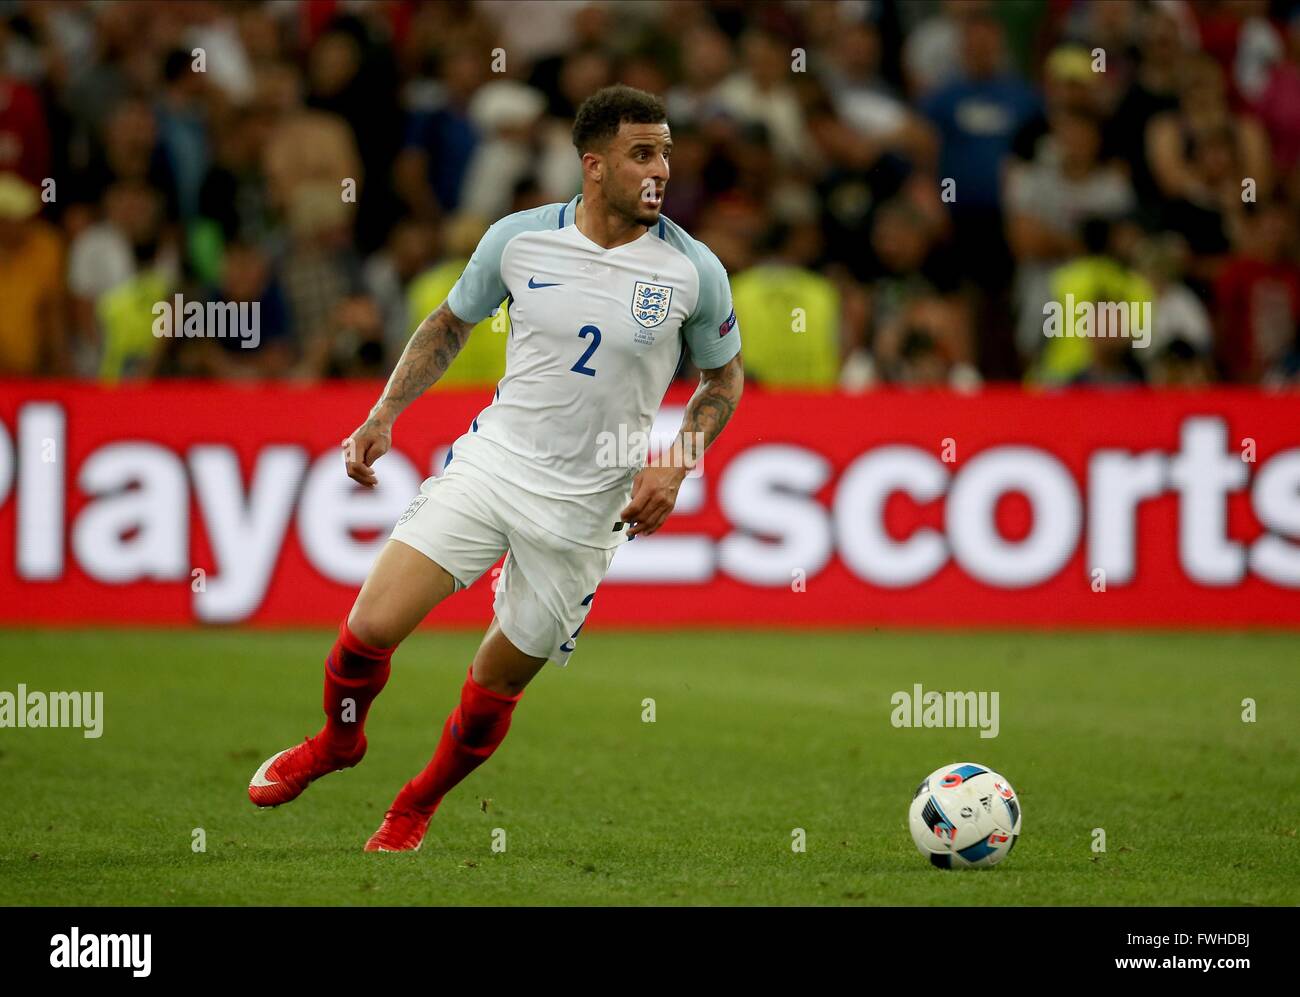 ENGLAND'S KYLE WALKER  ENGLAND V RUSSIA  ENGLAND V RUSSIA, EURO 2016 GROUP B  STADE VELODROME, MARSEILLE, FRANCE  12 June 2016  GAY96442      ENGLAND V RUSSIA, EURO 2016 Group B 11/06/2016        WARNING! This Photograph May Only Be Used For Newspaper And/Or Magazine Editorial Purposes. May Not Be Used For Publications Involving 1 player, 1 Club Or 1 Competition  Without Written Authorisation From Football DataCo Ltd.  For Any Queries, Please Contact Football DataCo Ltd on +44 (0) 207 864 9121 Stock Photo